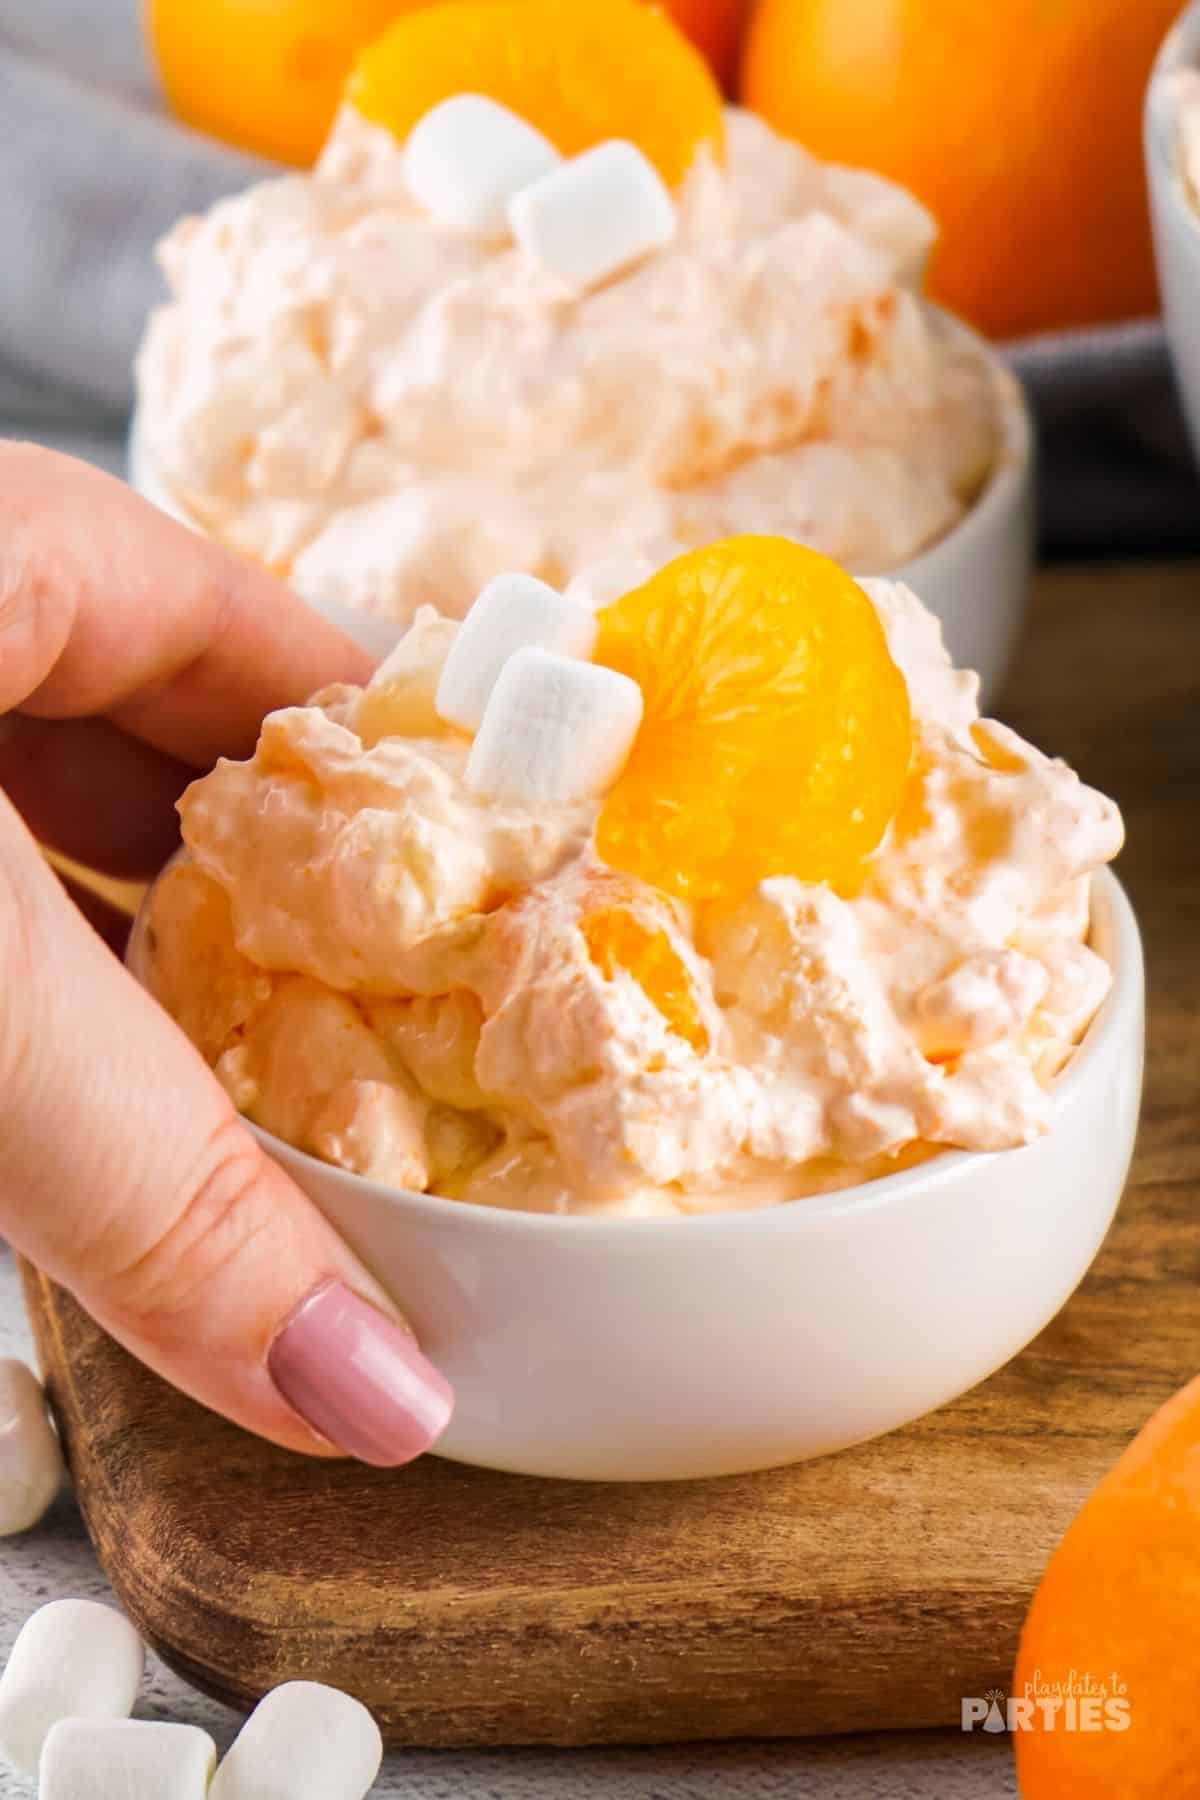 Orange fluff jello salad being picked up by a woman's hand.